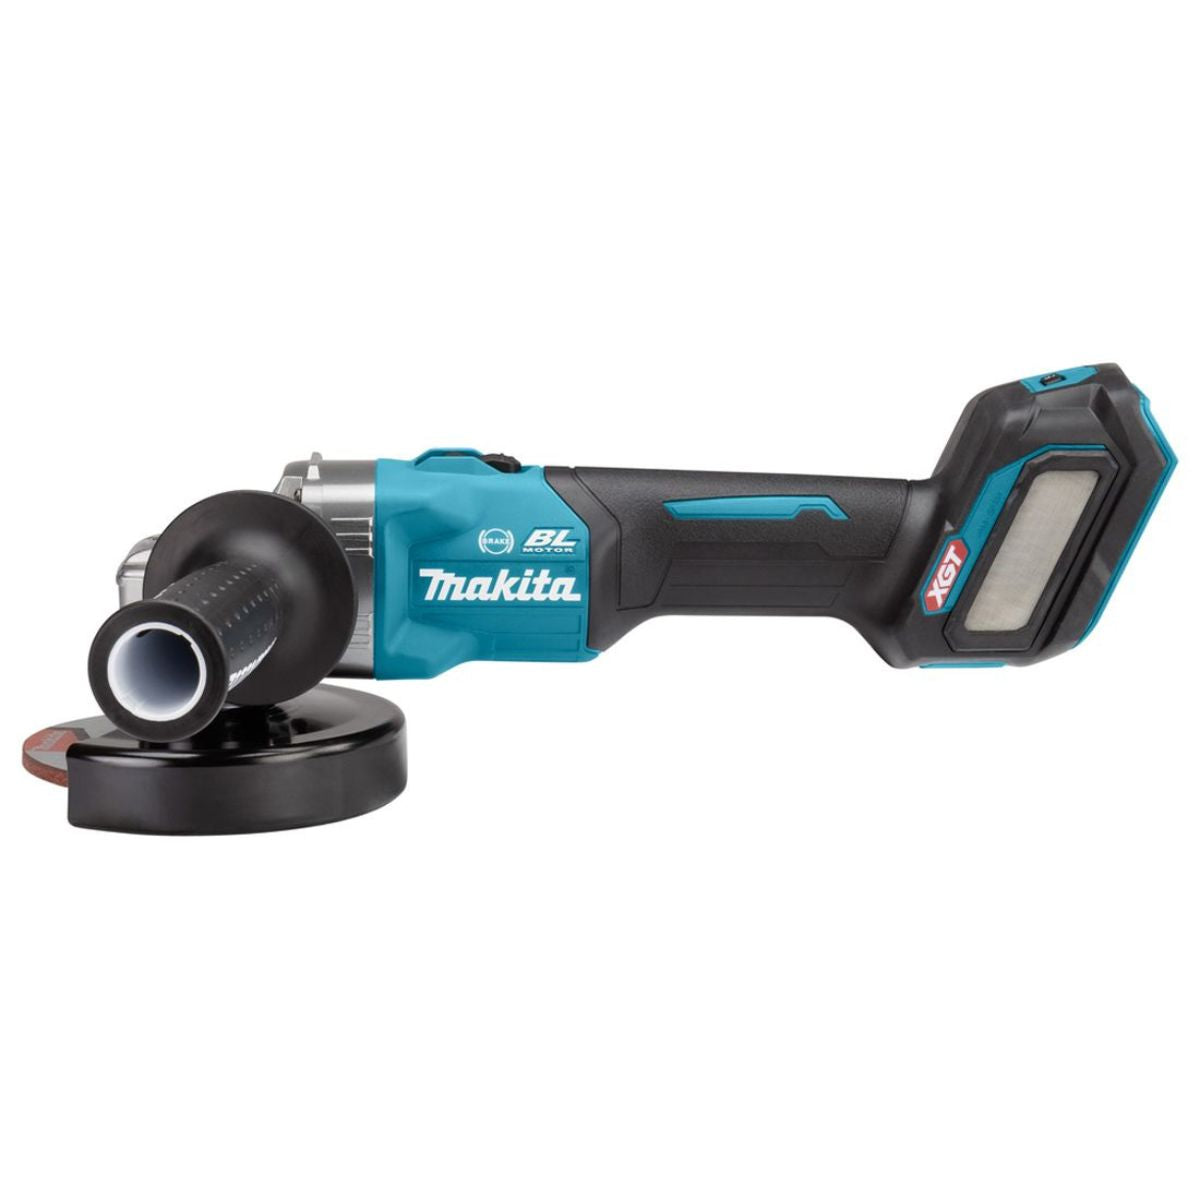 Makita GA023GZ01 40v XGT Max 125mm Brushless Angle Grinder Body Only With Carry Case